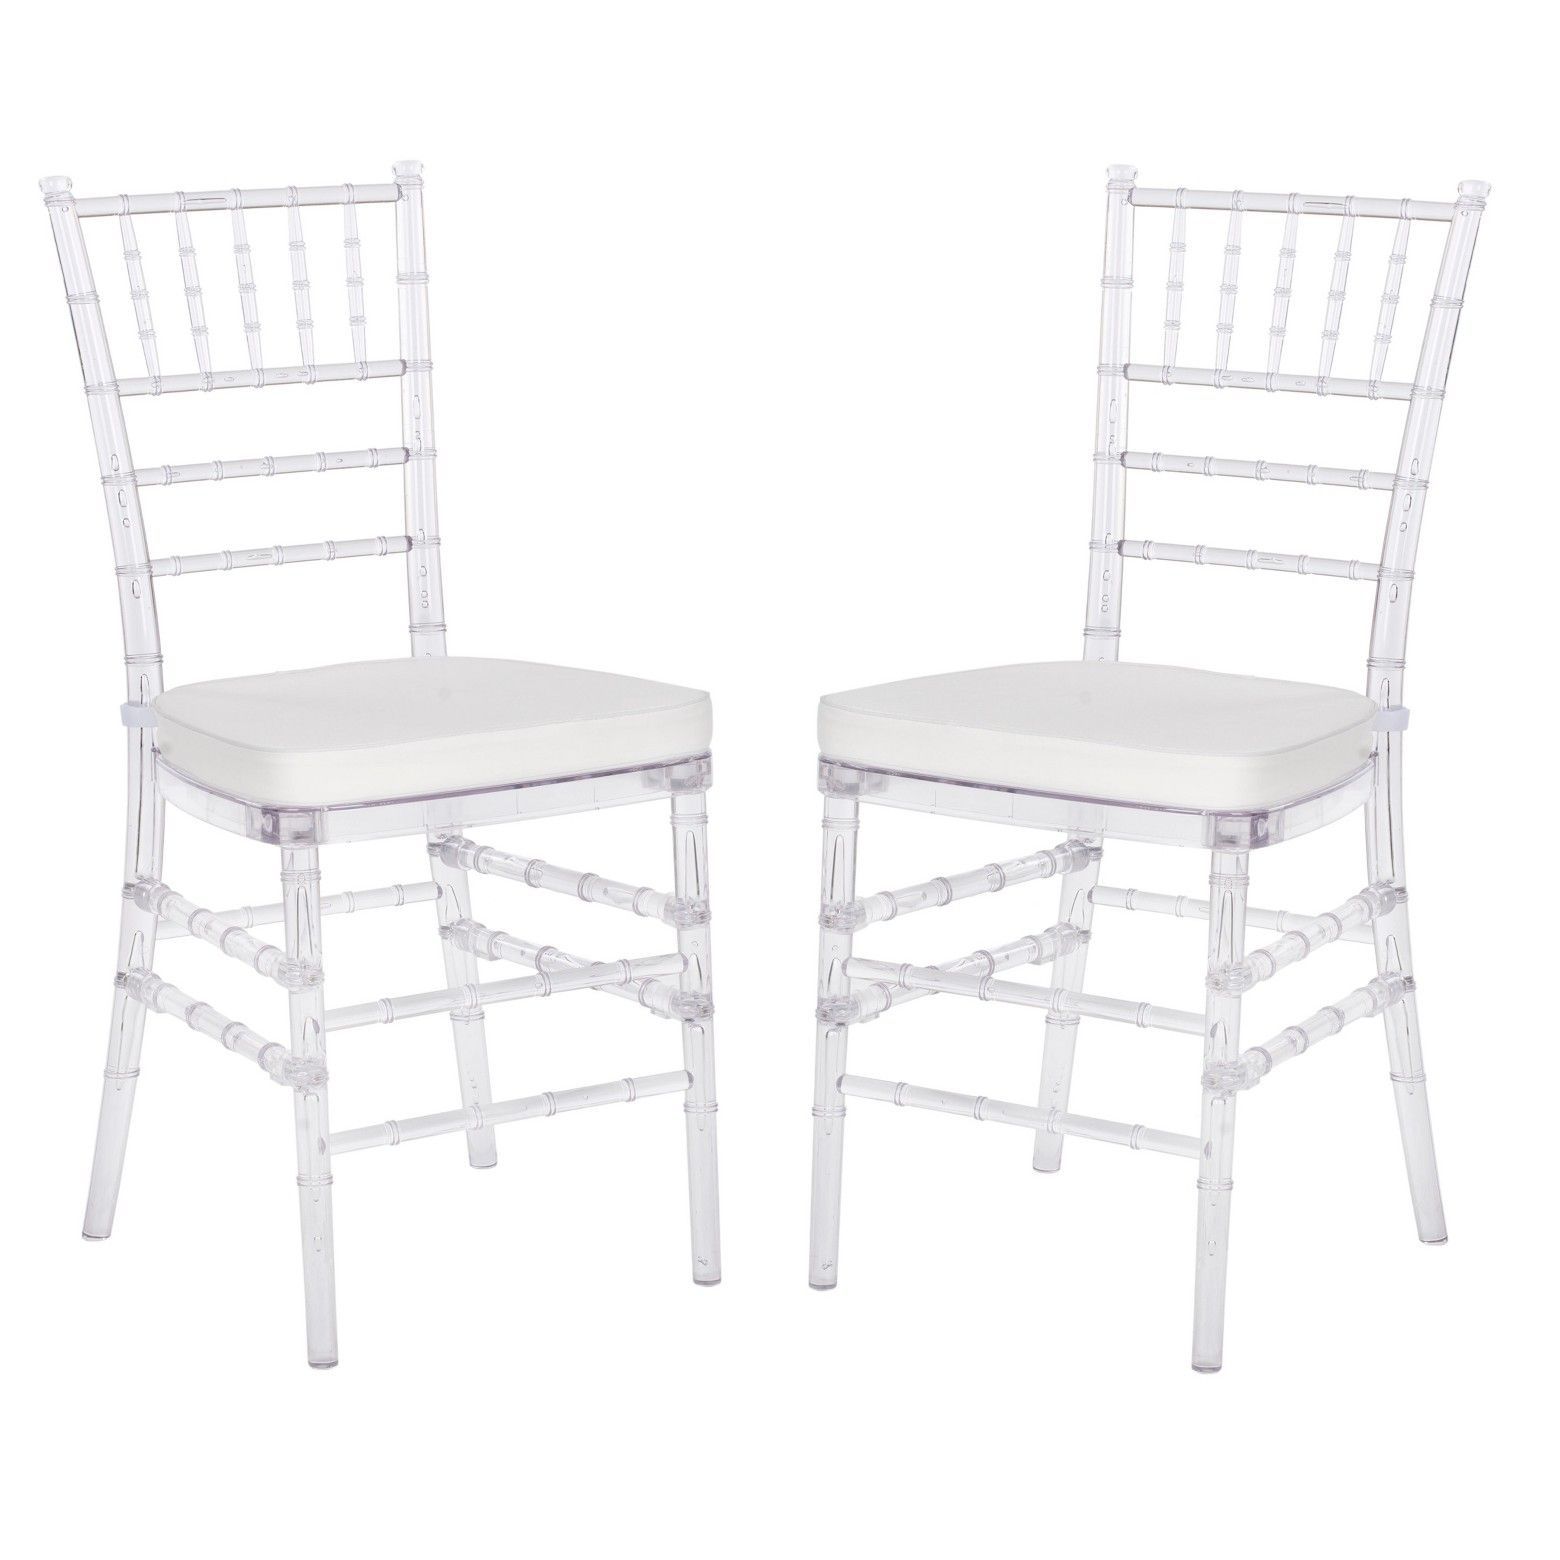 The Future Is Now, And The Safavieh Carly Dining Chair – Set Of 2 Is Regarding Famous Carly Side Chairs (View 10 of 20)